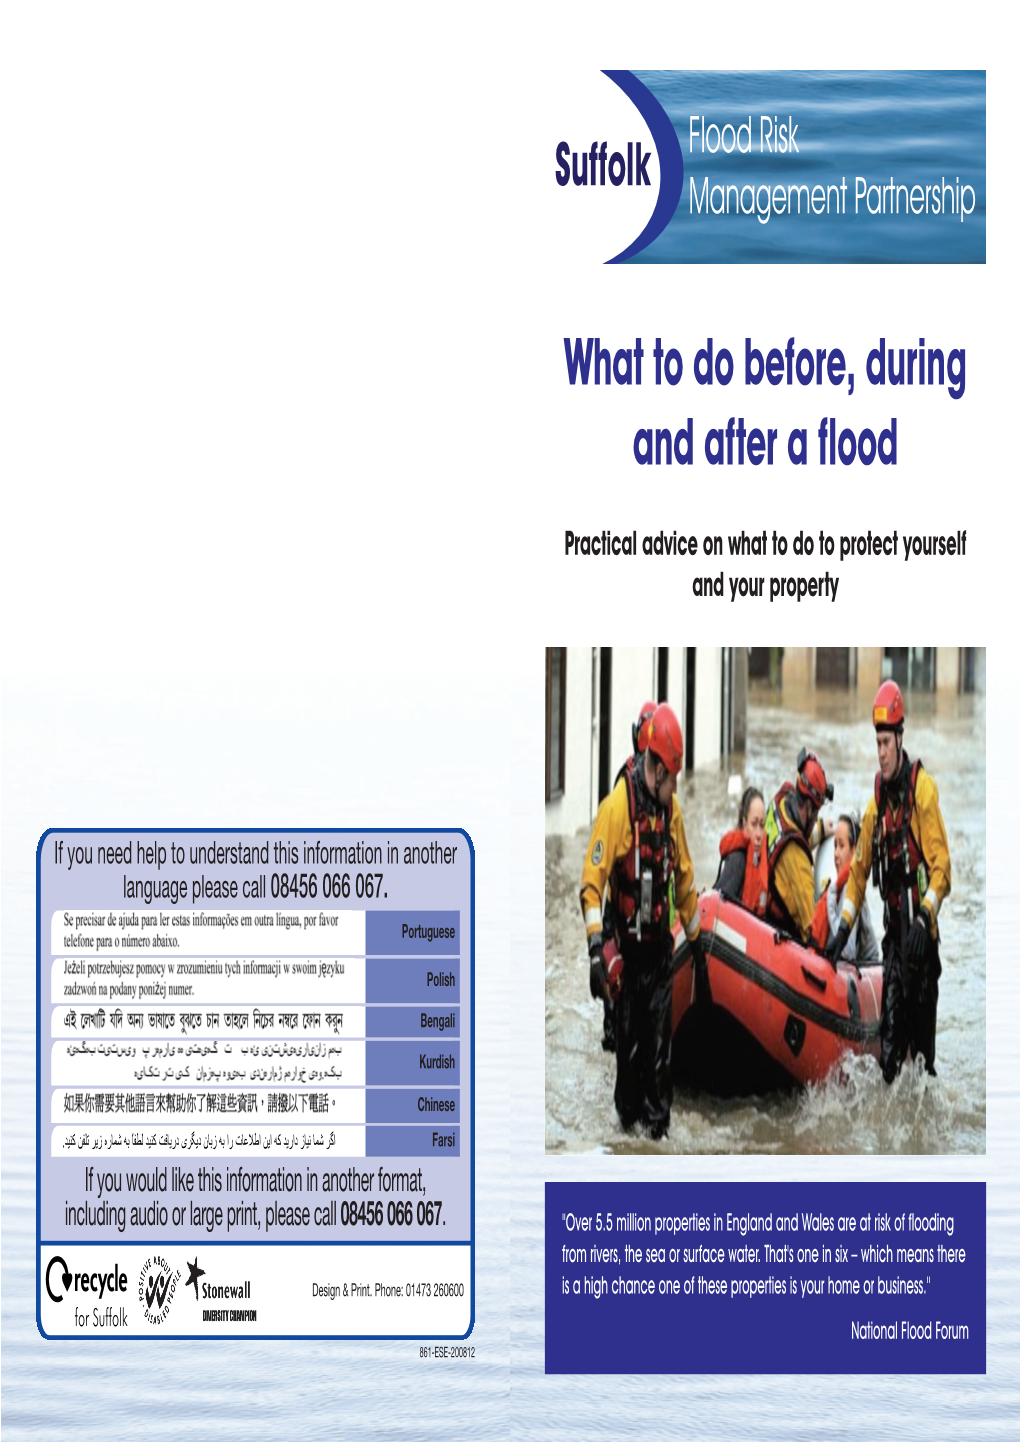 What to Do Before, During and After a Flood